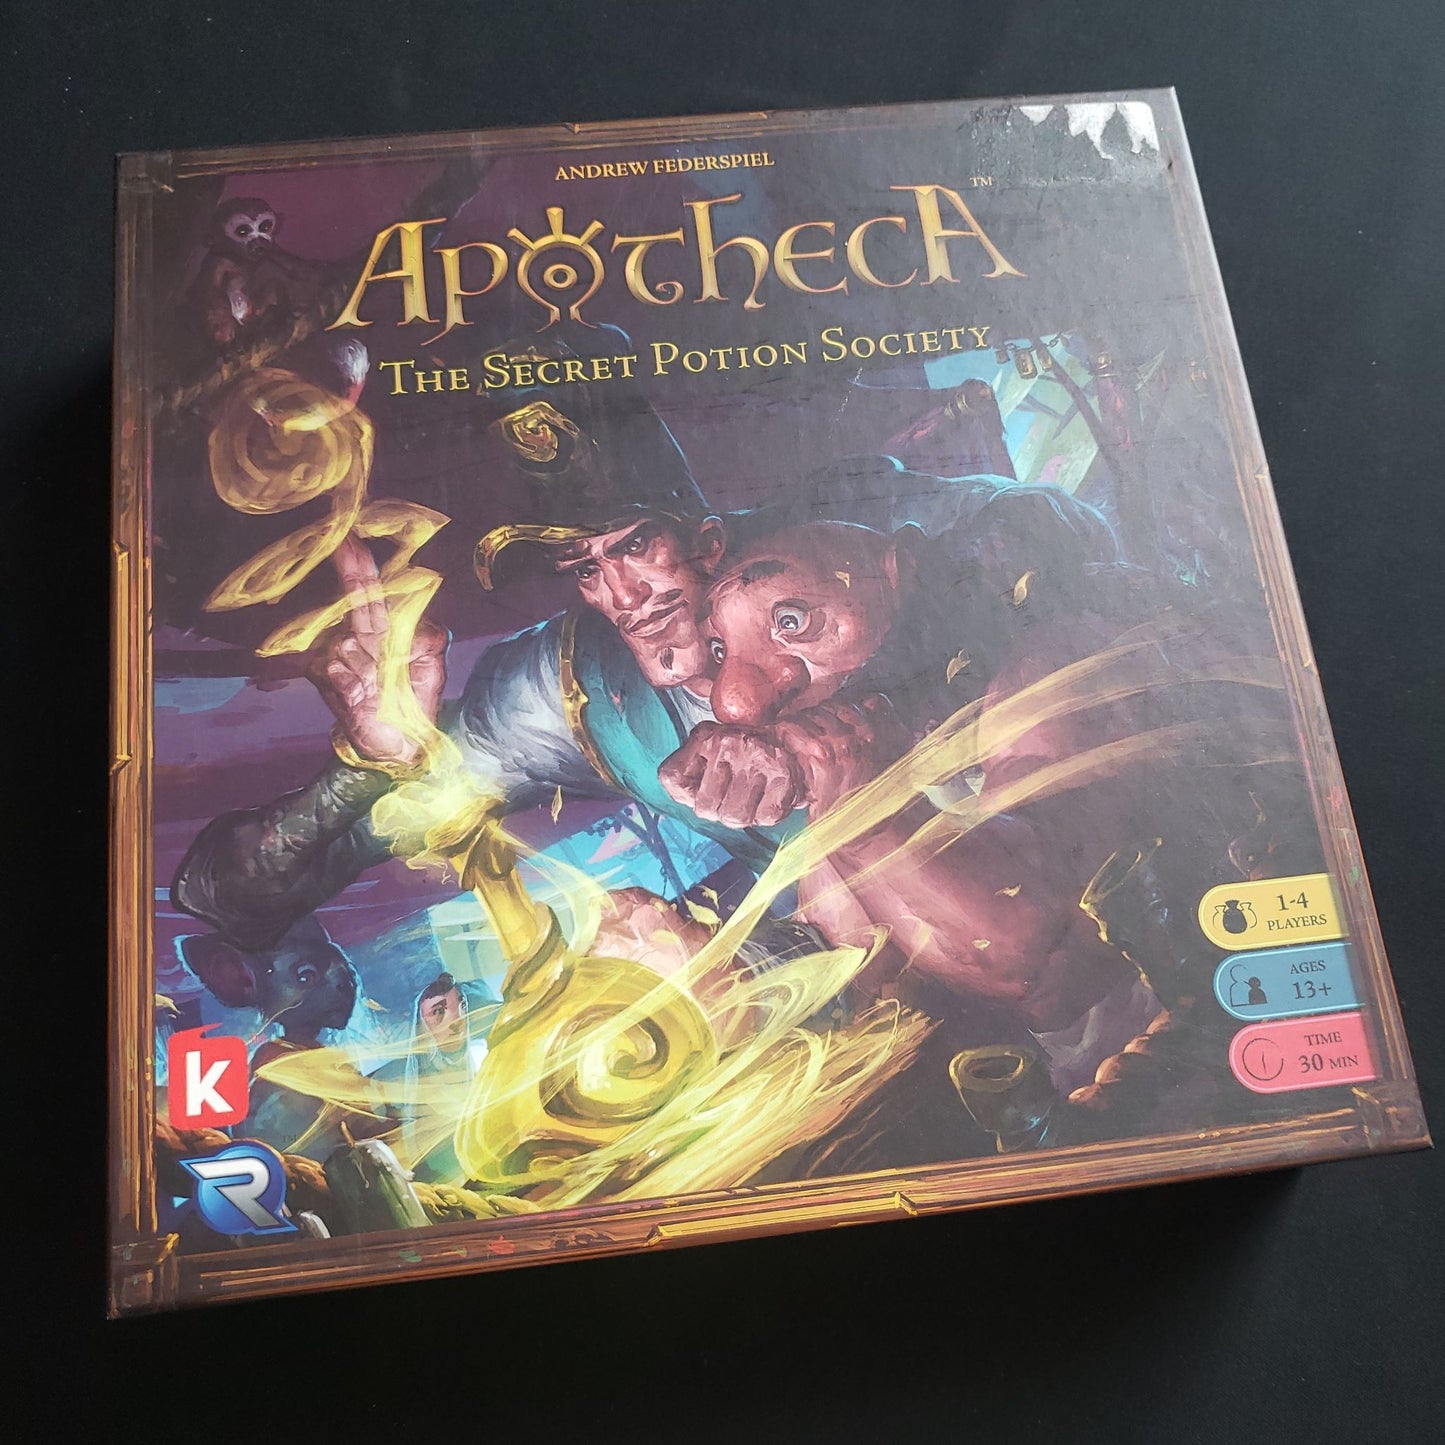 Apotheca board game - front cover of box